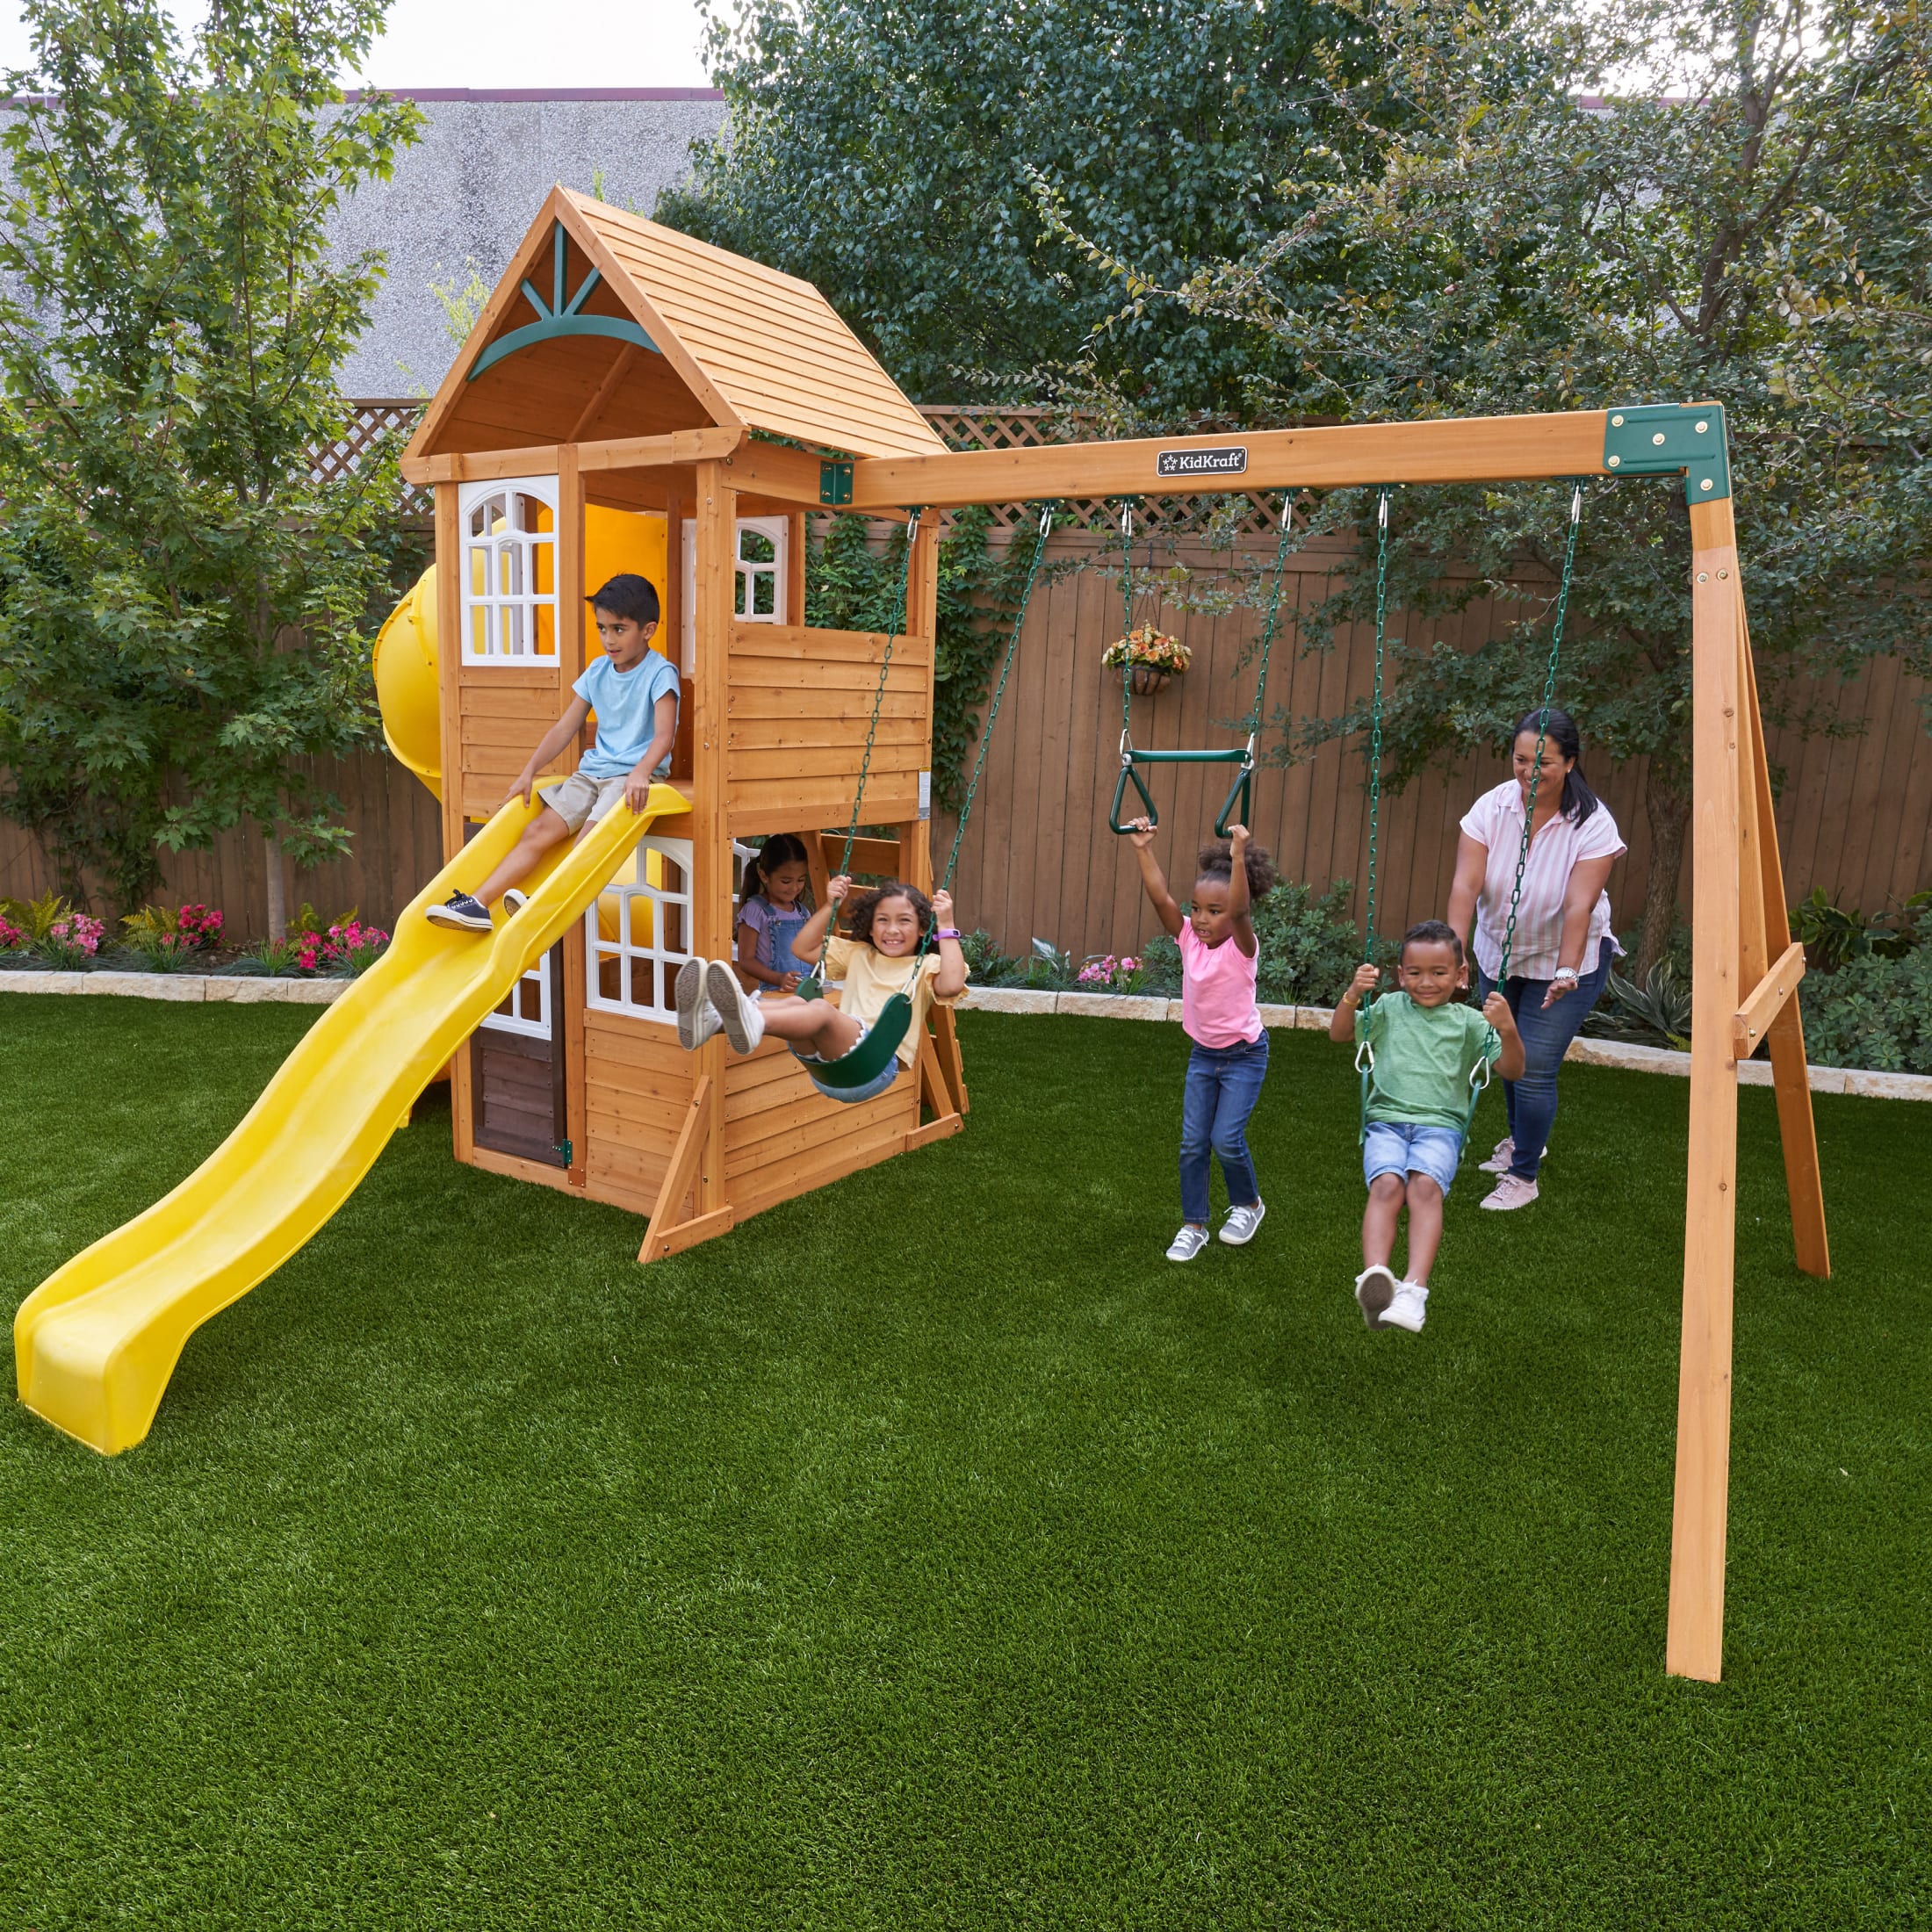 KidKraft Castlewood Wooden Swing Set / Playset with Clubhouse, Mailbox, Slide and Play Kitchen - image 1 of 10